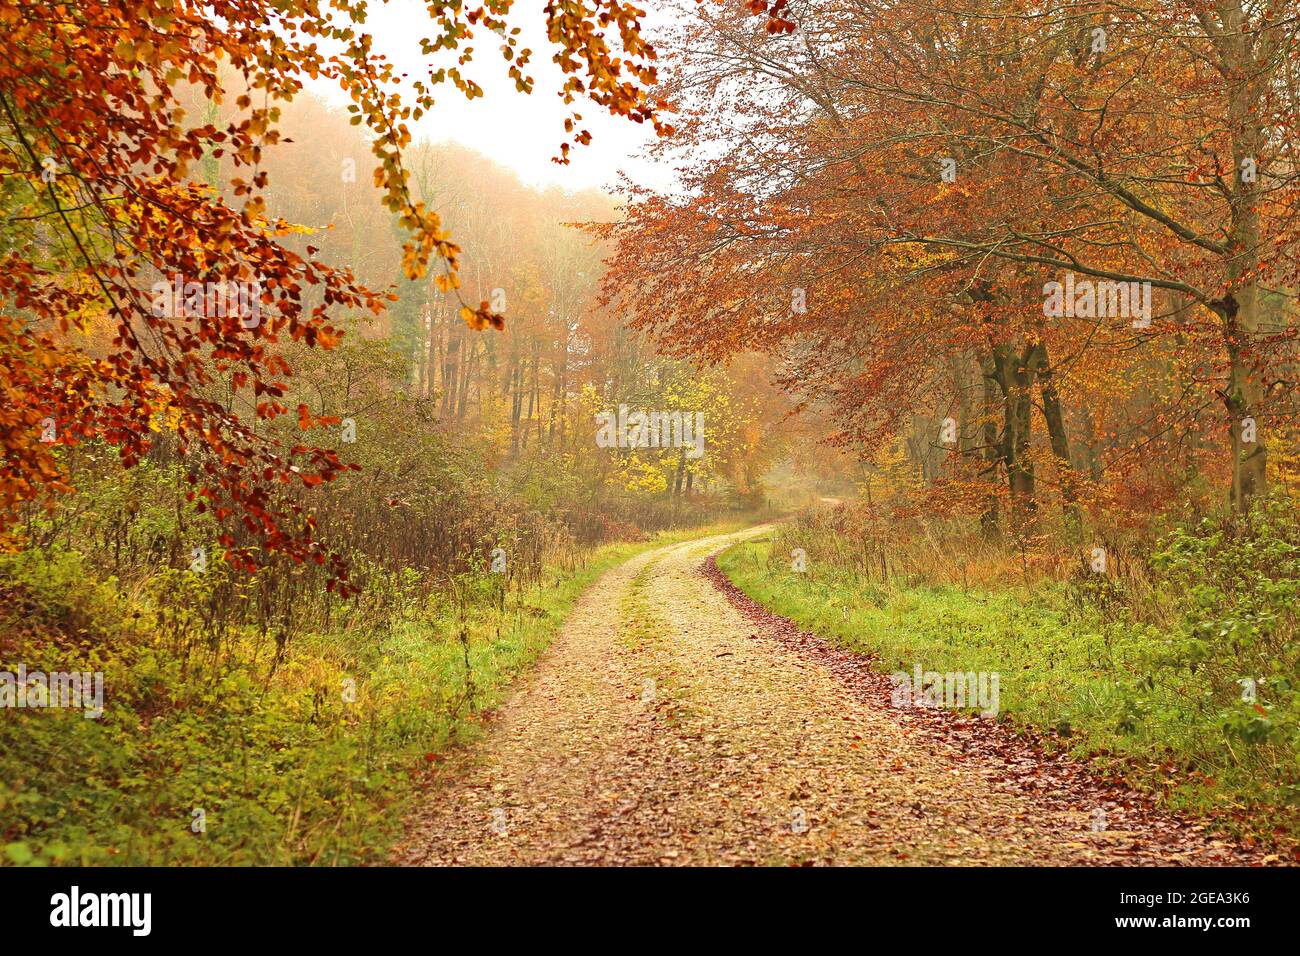 Footpath into a misty autumn forest Stock Photo